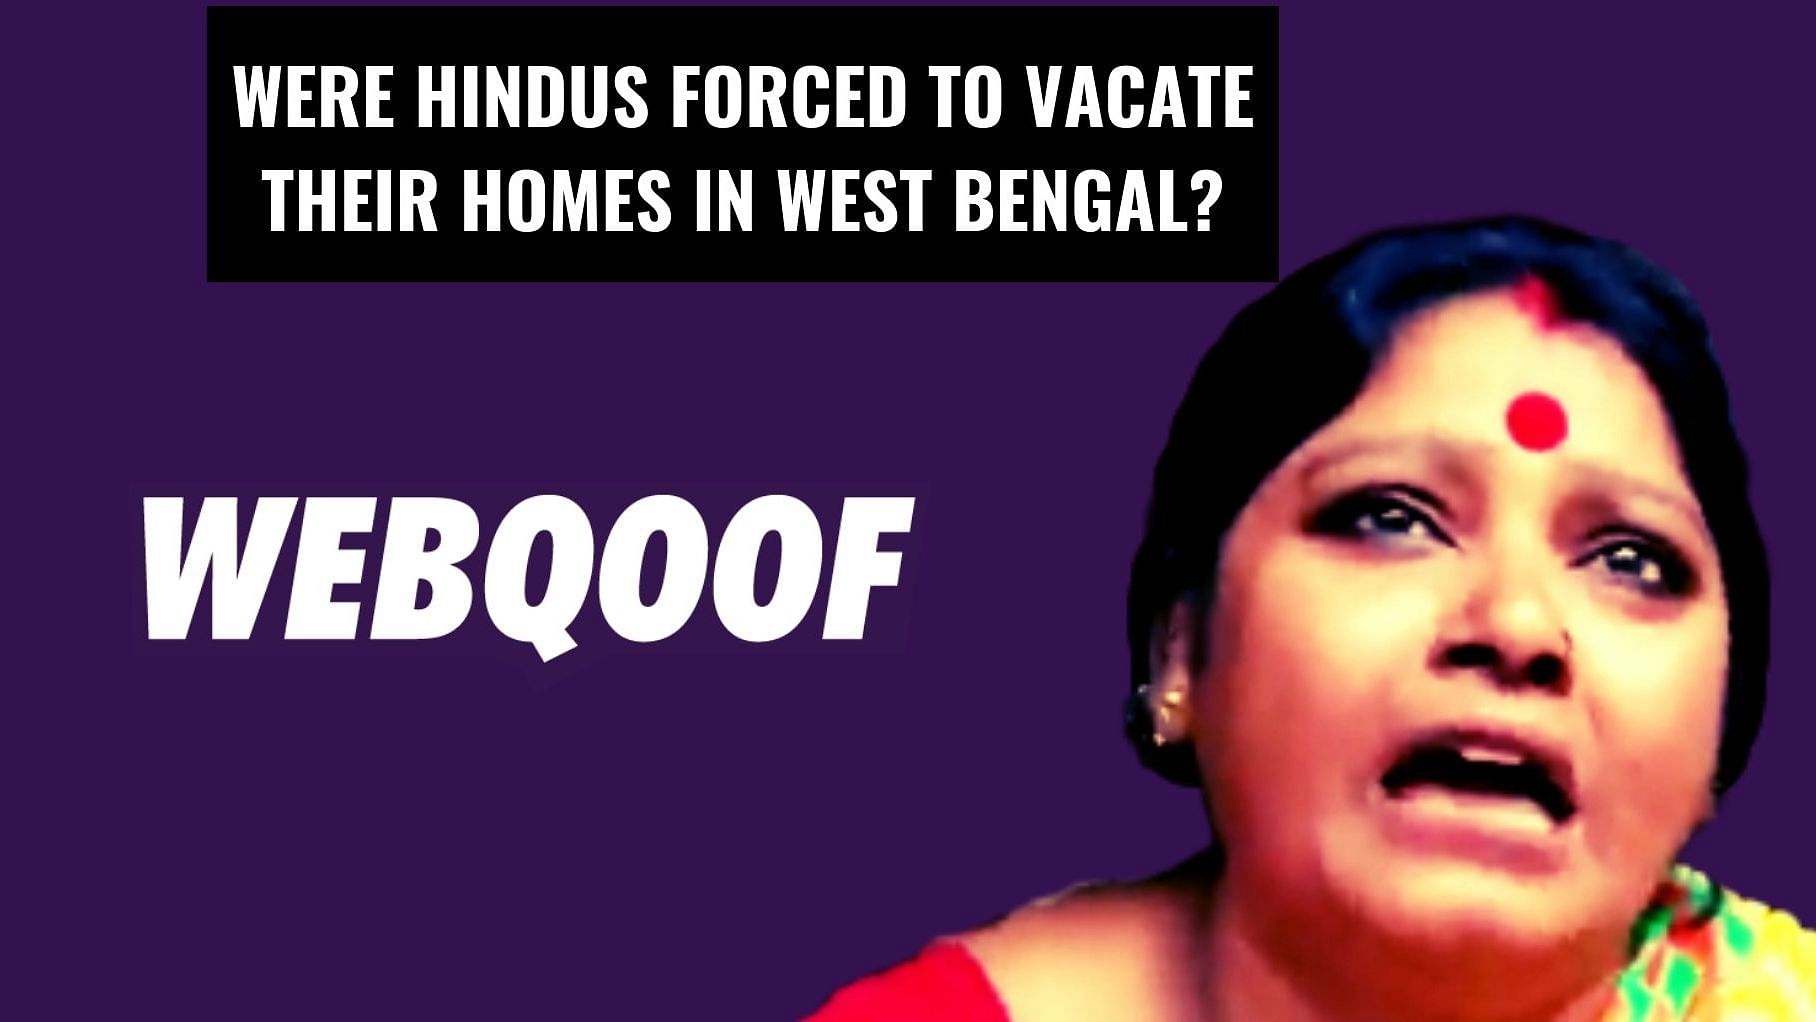 A viral video falsely claimed that Hindus were forced to vacate their homes in West Bengal. 